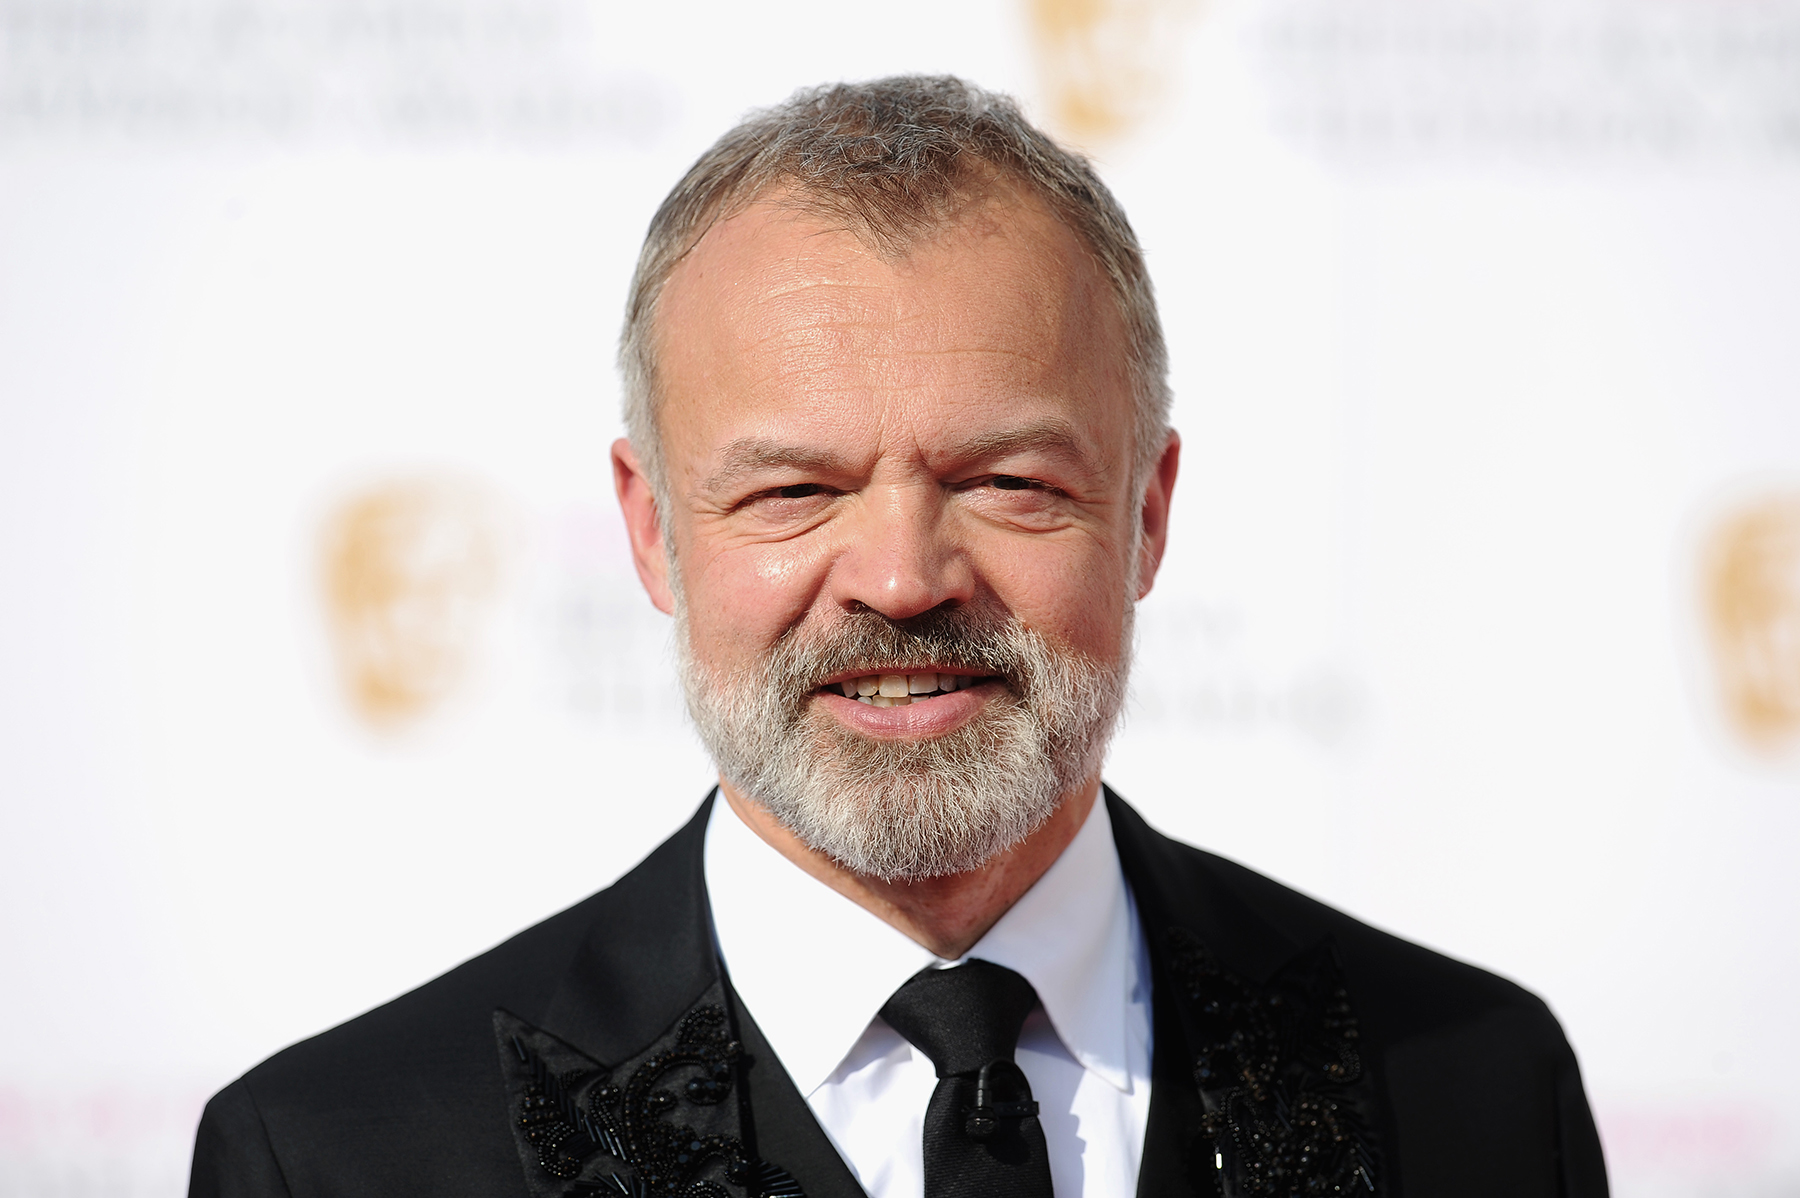 Graham Norton guest tells the most awkward wedding story ever